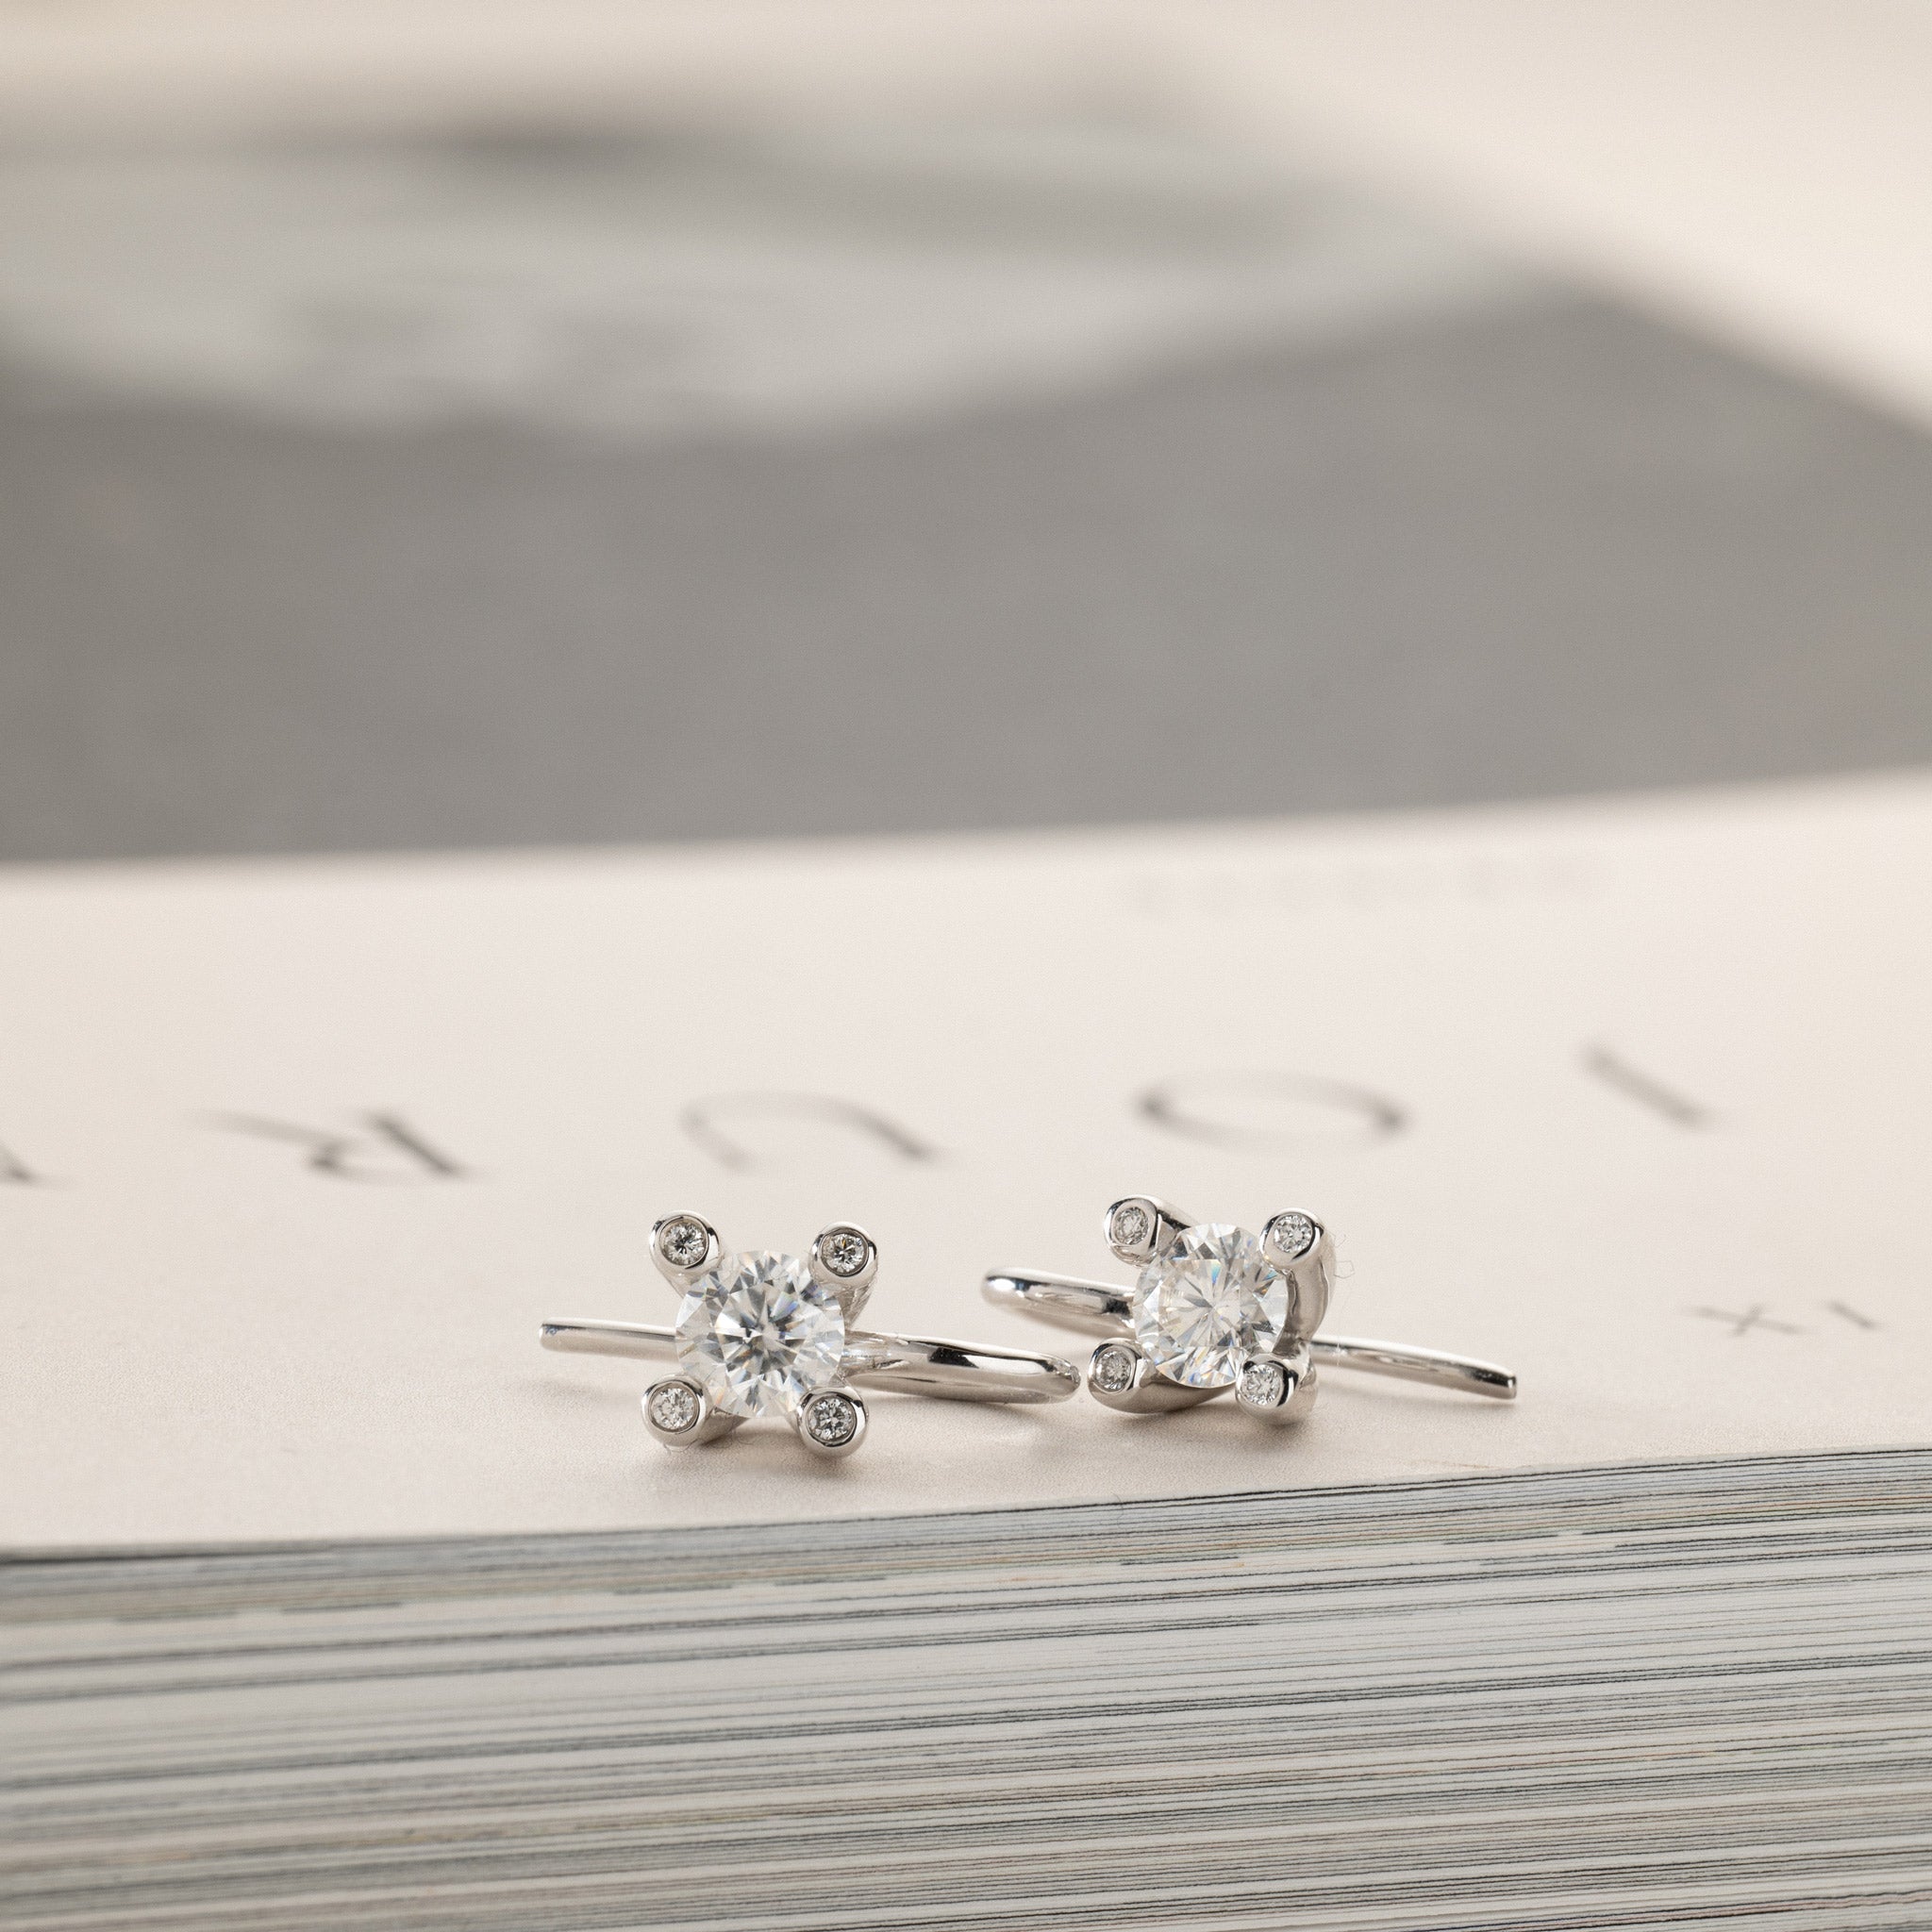 2x0.50ct Moissanite solitaire earrings silver diamonds in crown Miriam